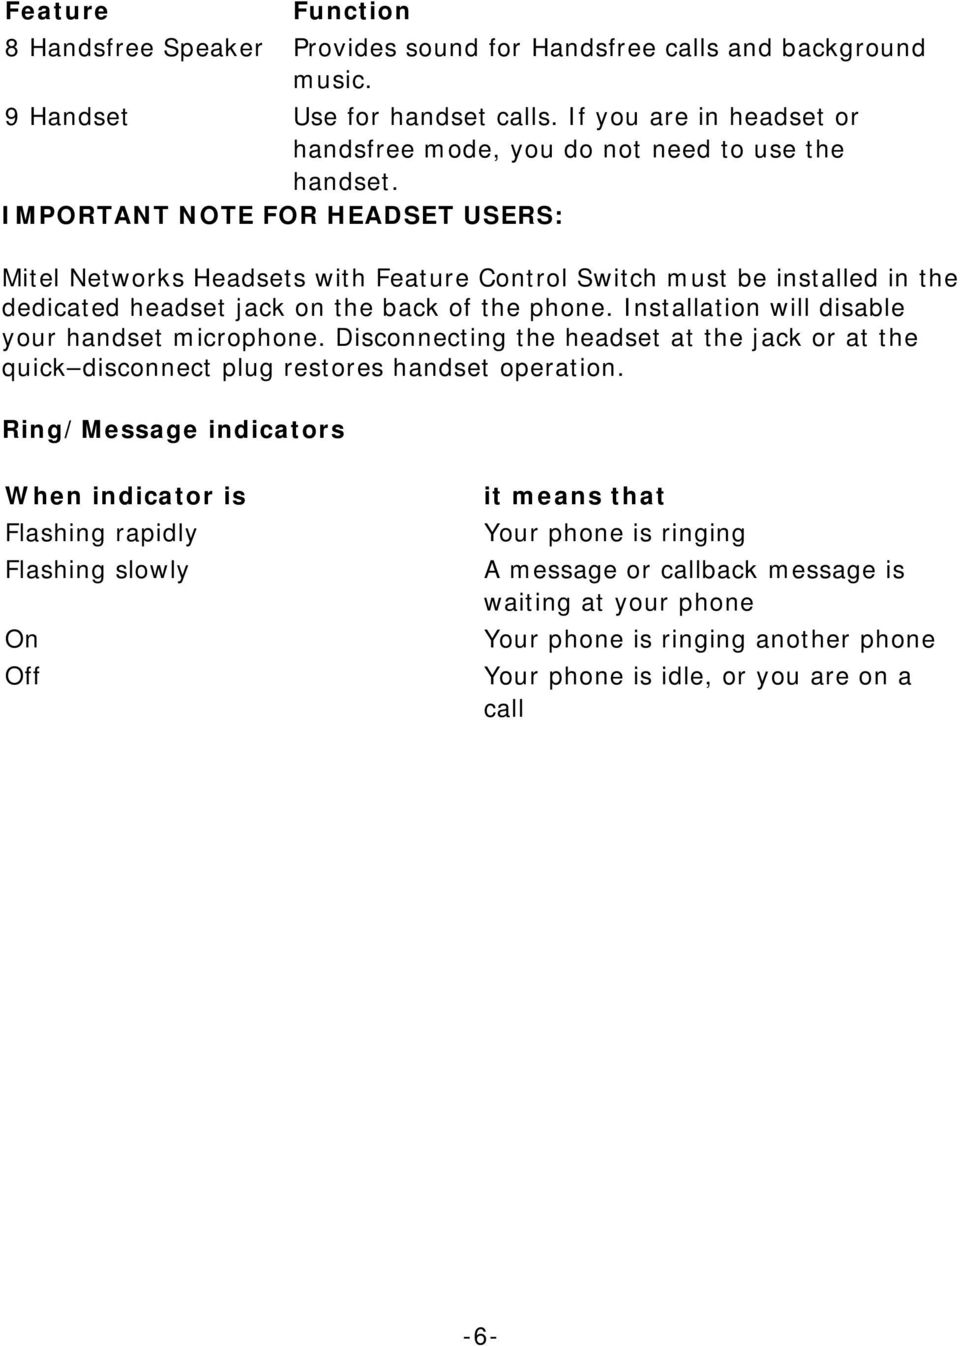 IMPORTANT NOTE FOR HEADSET USERS: Mitel Networks Headsets with Feature Control Switch must be installed in the dedicated headset jack on the back of the phone.